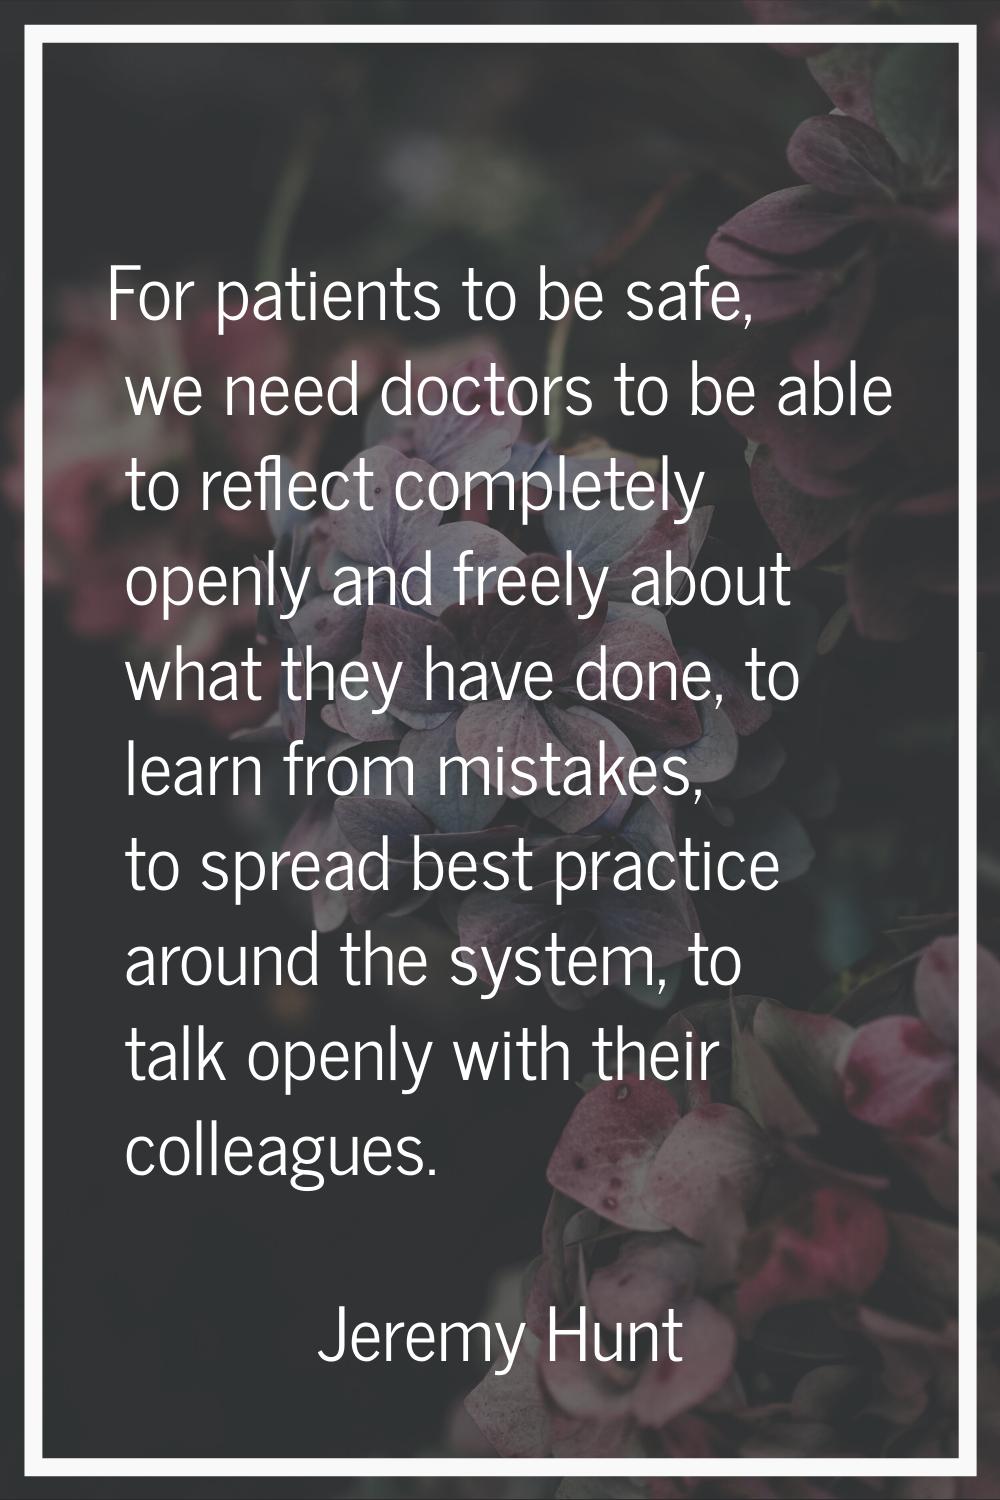 For patients to be safe, we need doctors to be able to reflect completely openly and freely about w